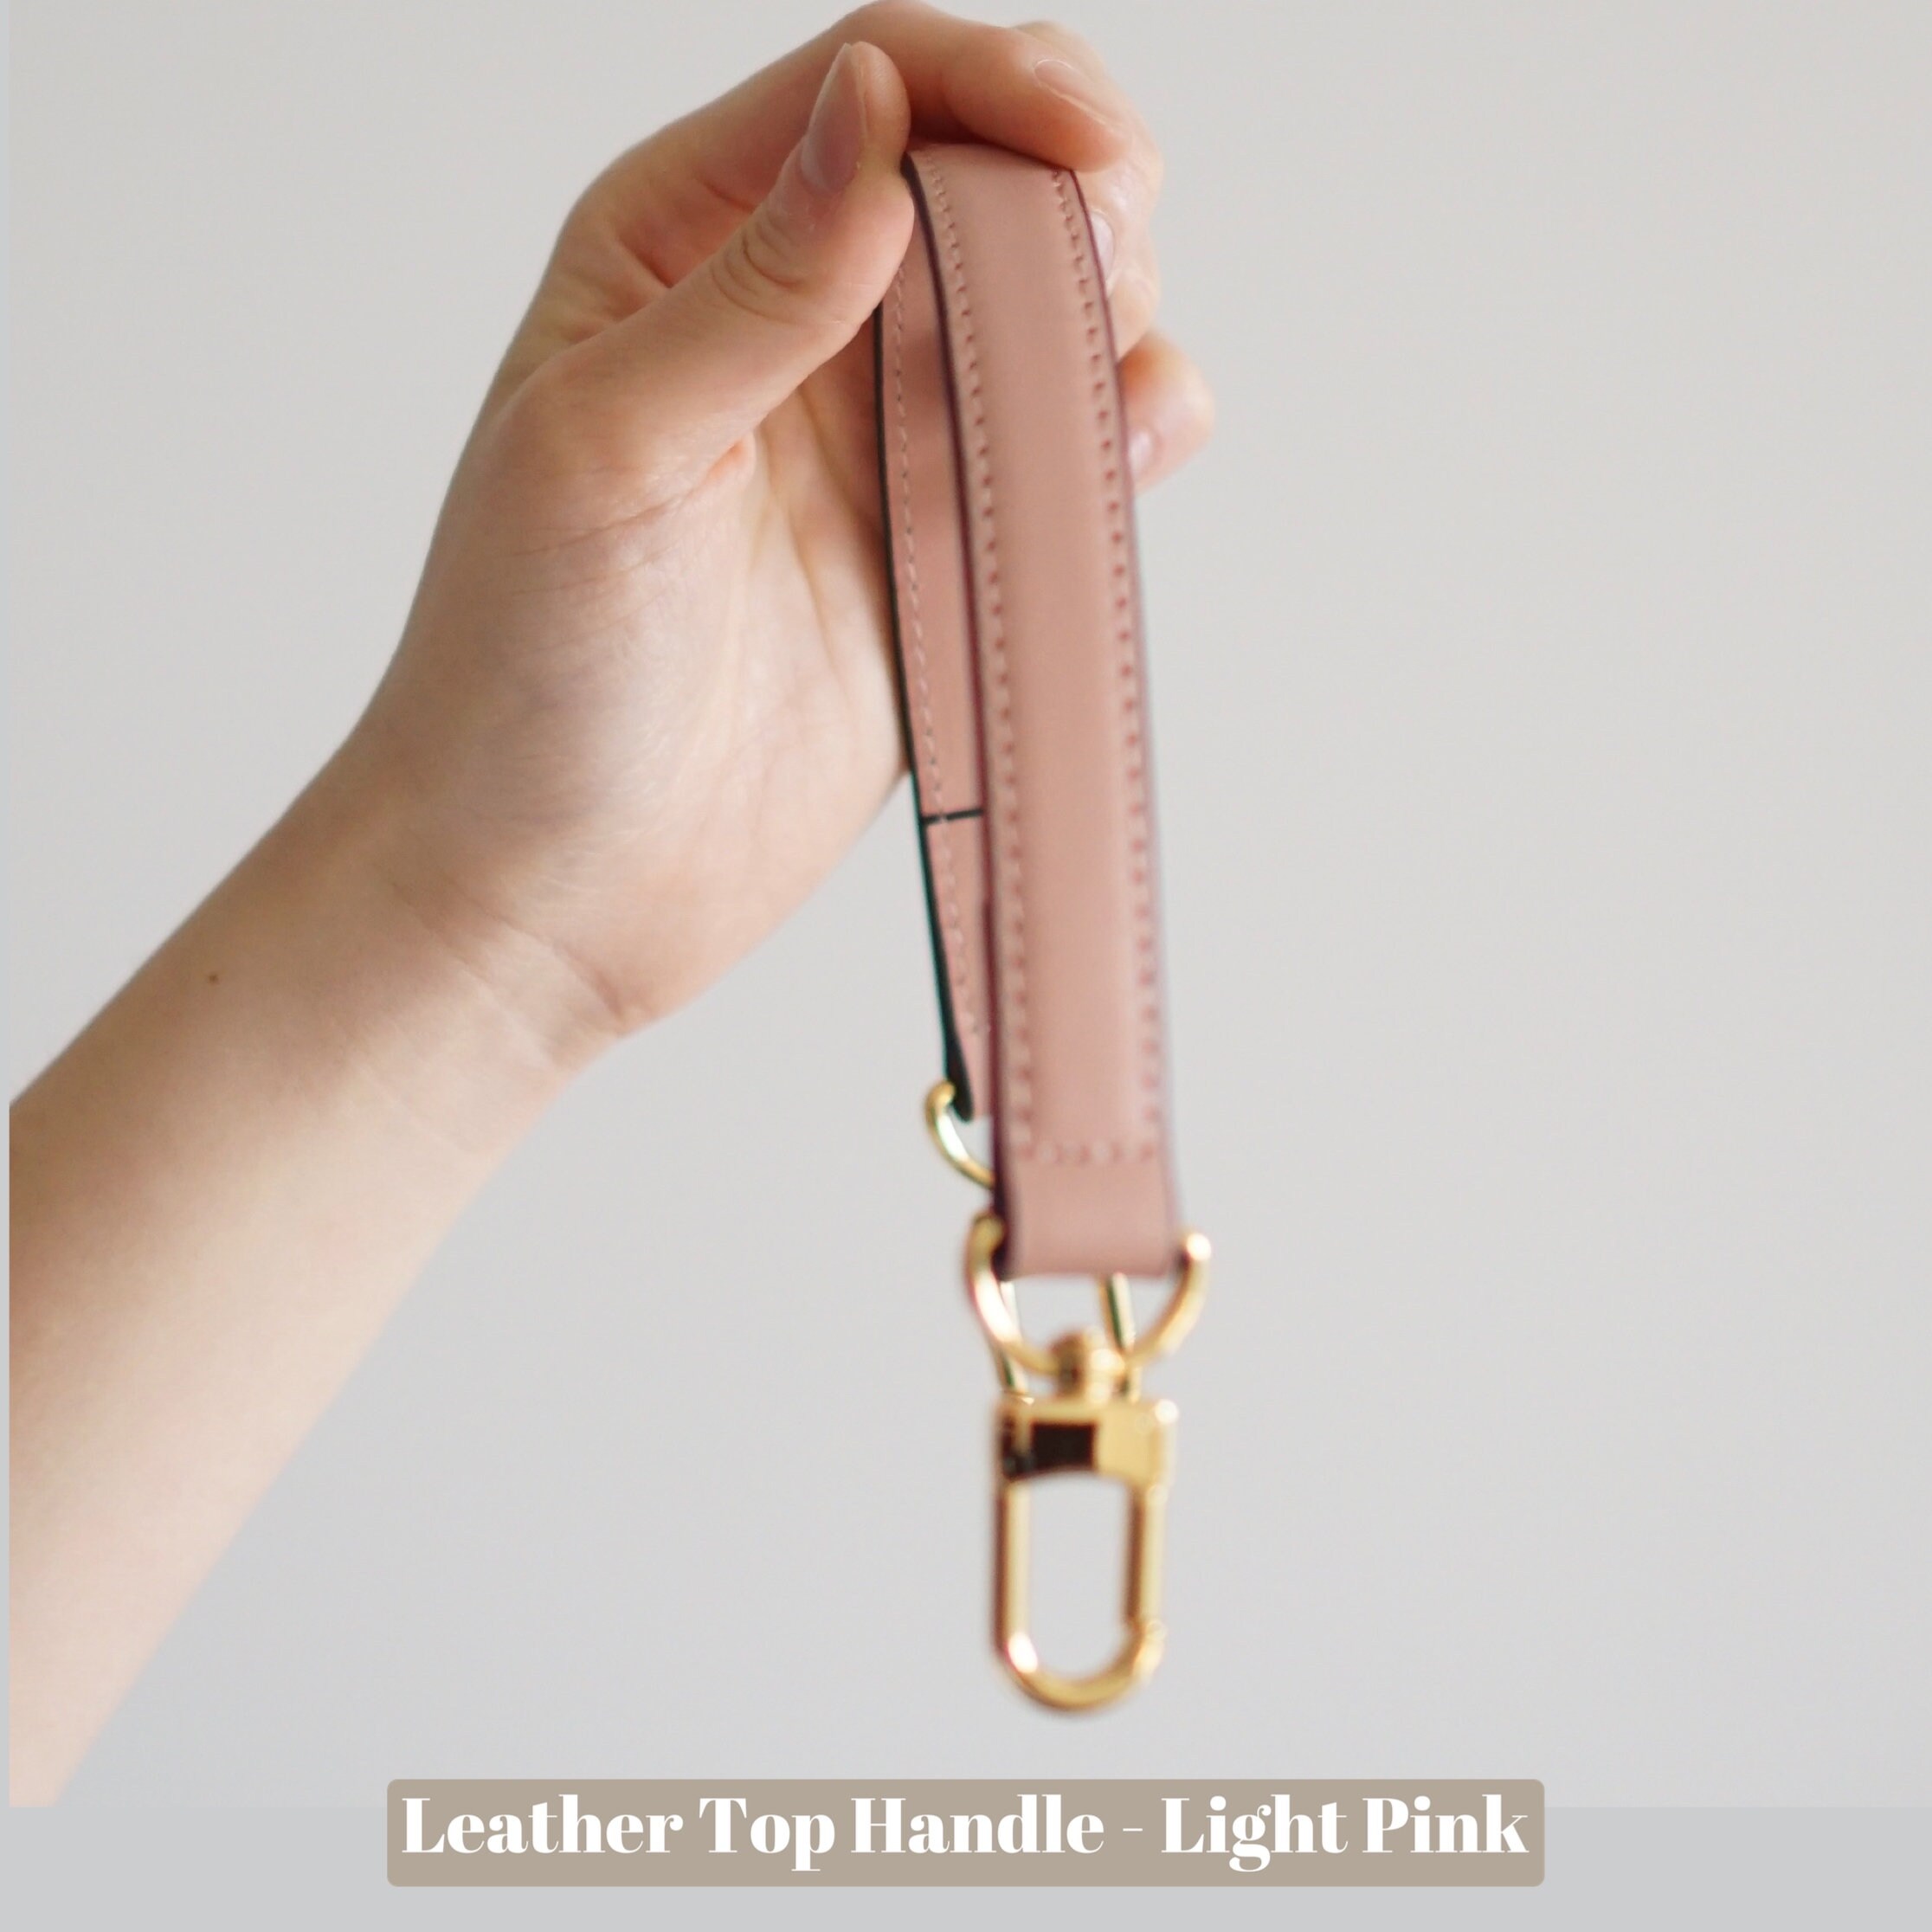 Braided Leather Top Handle Strap Noe Bb Handle Bag Handle 